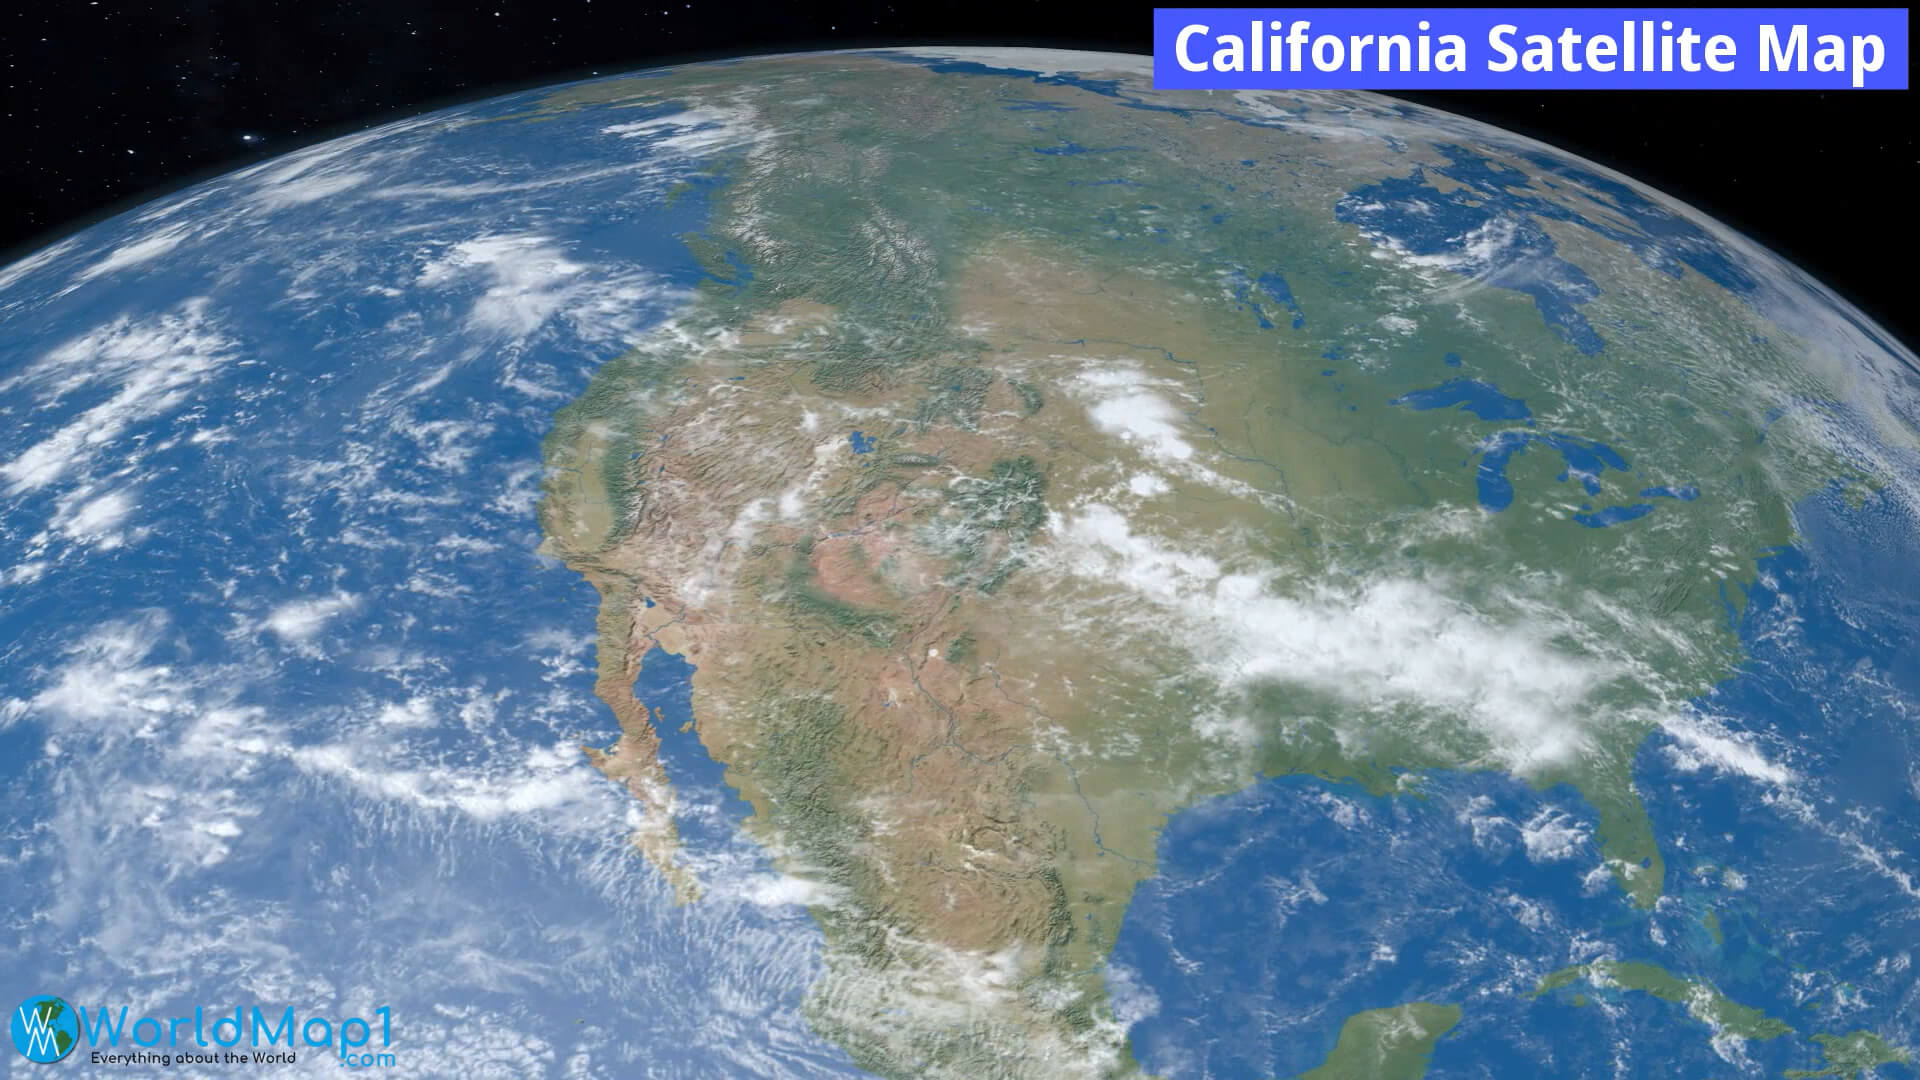 California Satellite View from Space